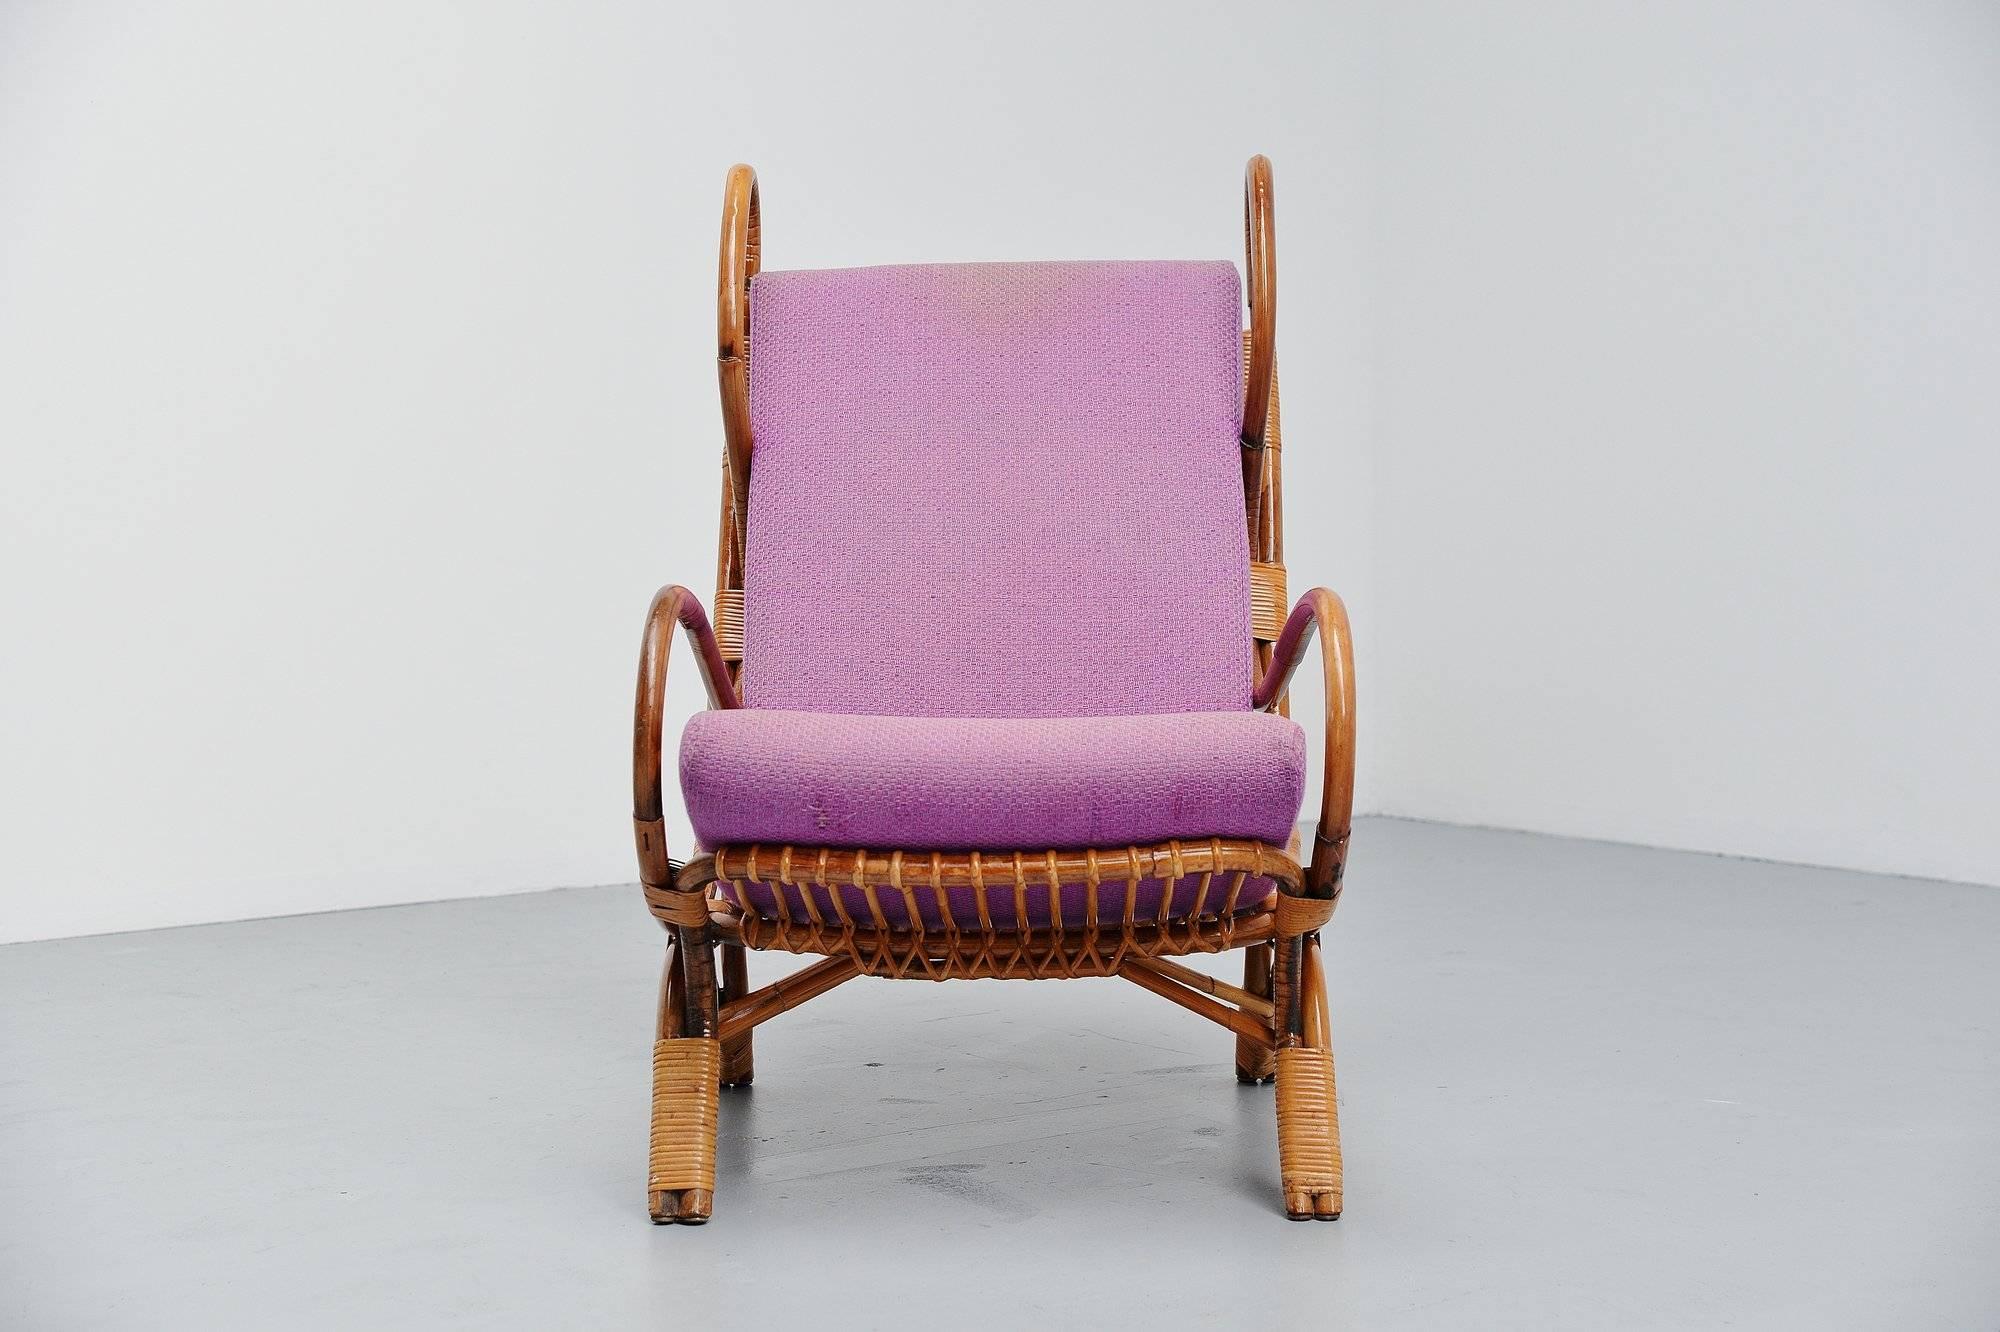 Rare bamboo 'Continuum' lounge chair model BP16 designed by Gio Ponti, manufactured by Bonacina, Lurago d'Erba, Como Italy 1963. The chair is completely made of bamboo and wicker and still has its original purple upholstery and cushion. The cushion